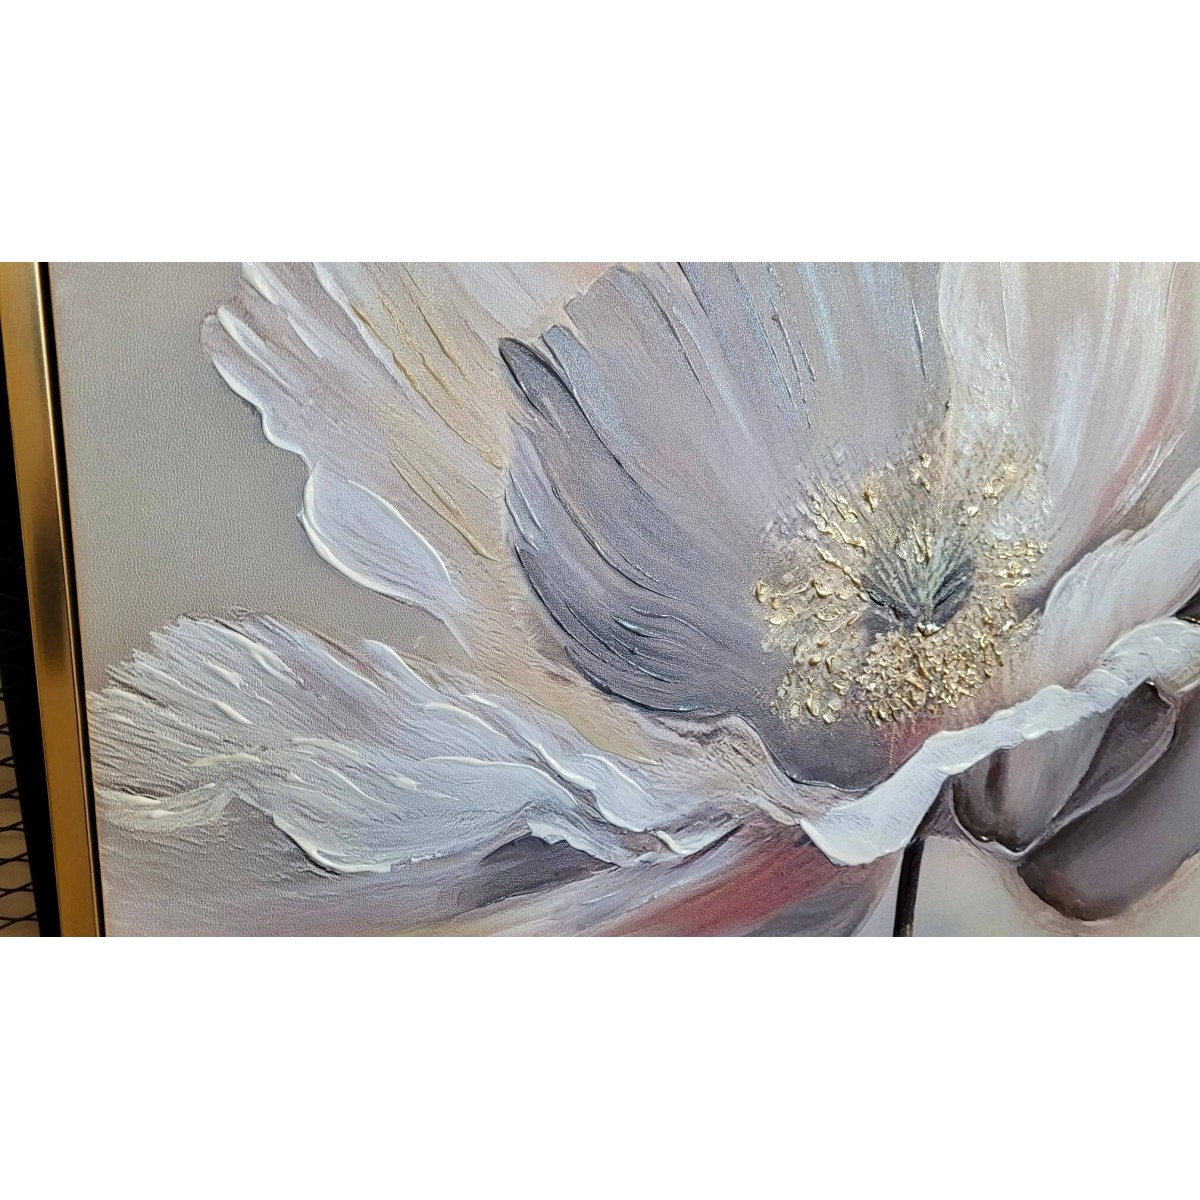 One Beige Flower Textured Partial Oil Painting